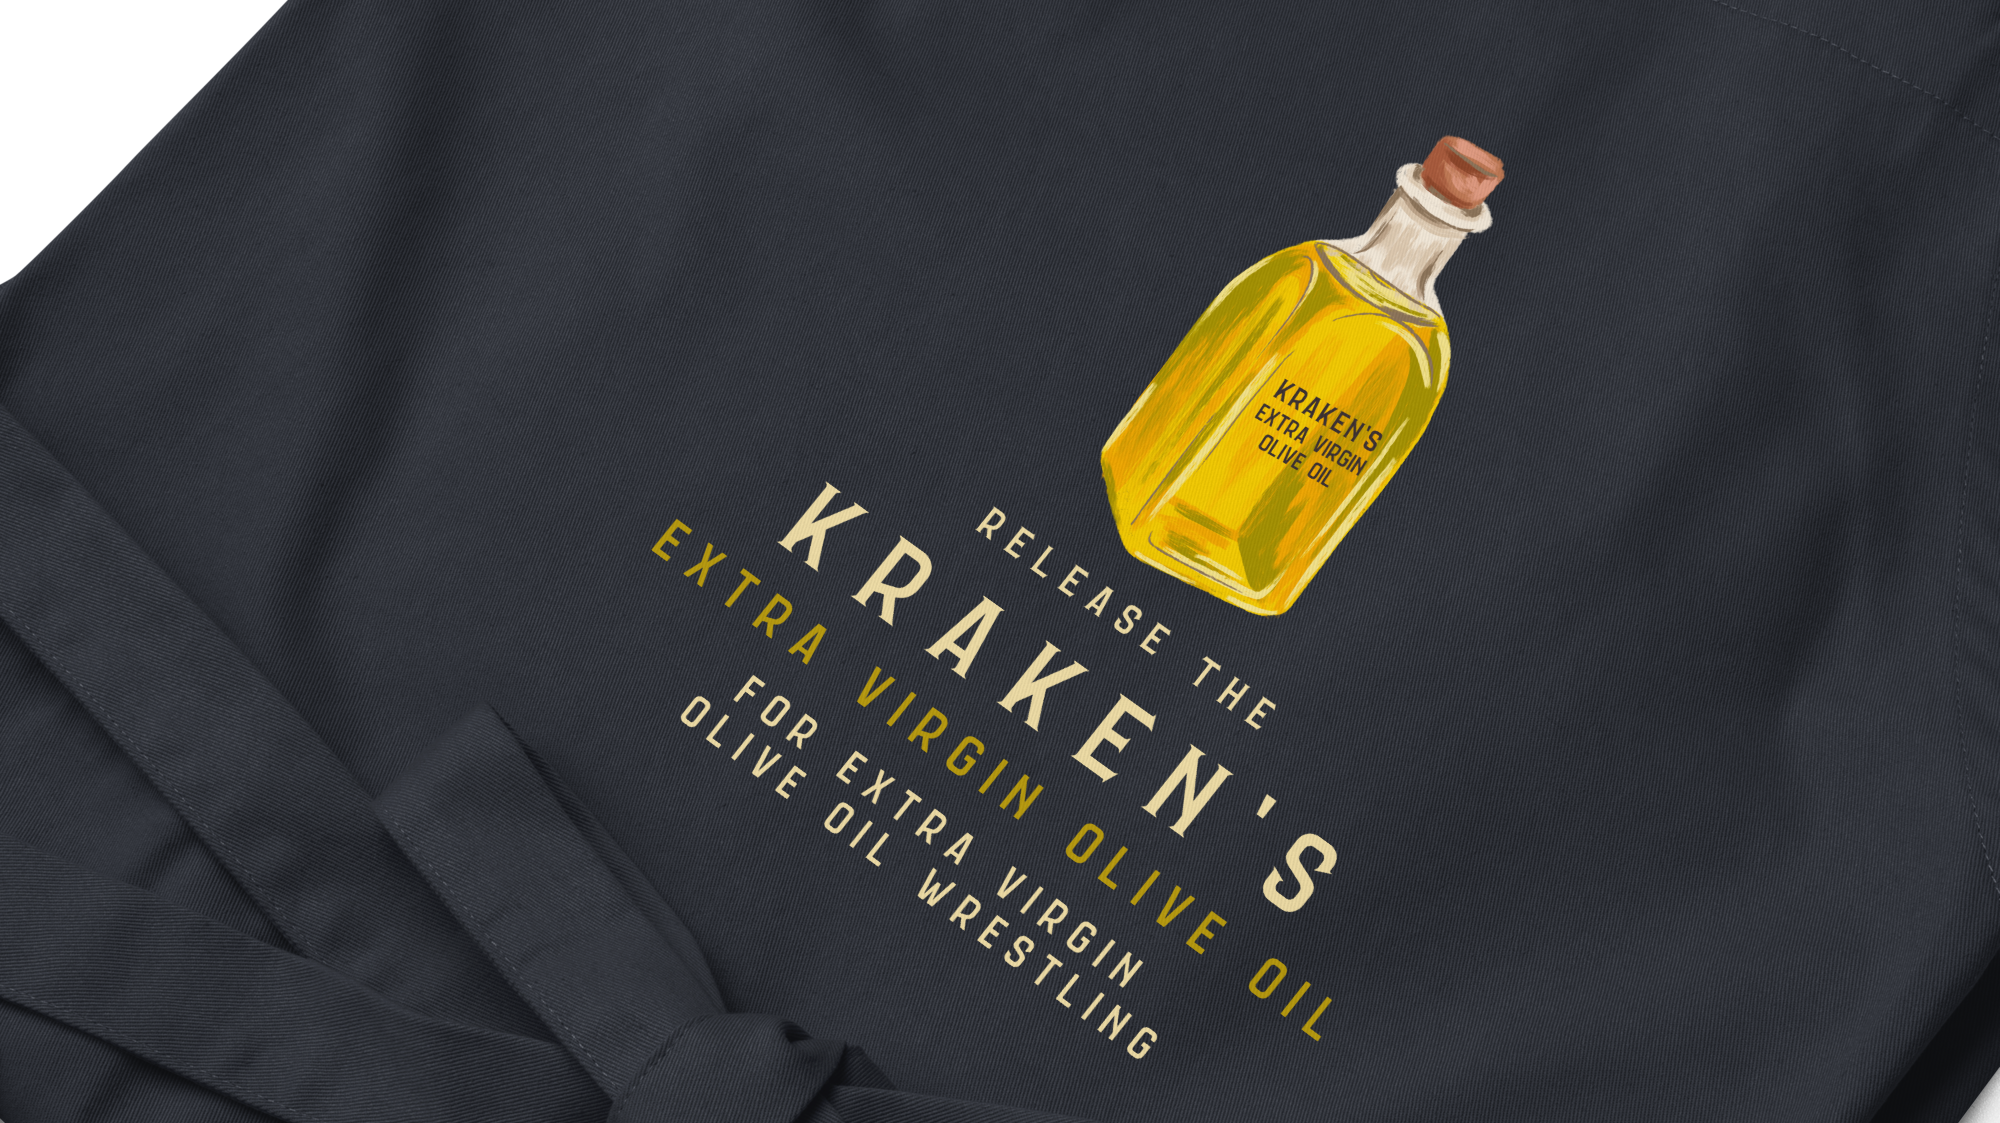 Kraken's Extra Virgin Olive Oil organic cotton aprons and more